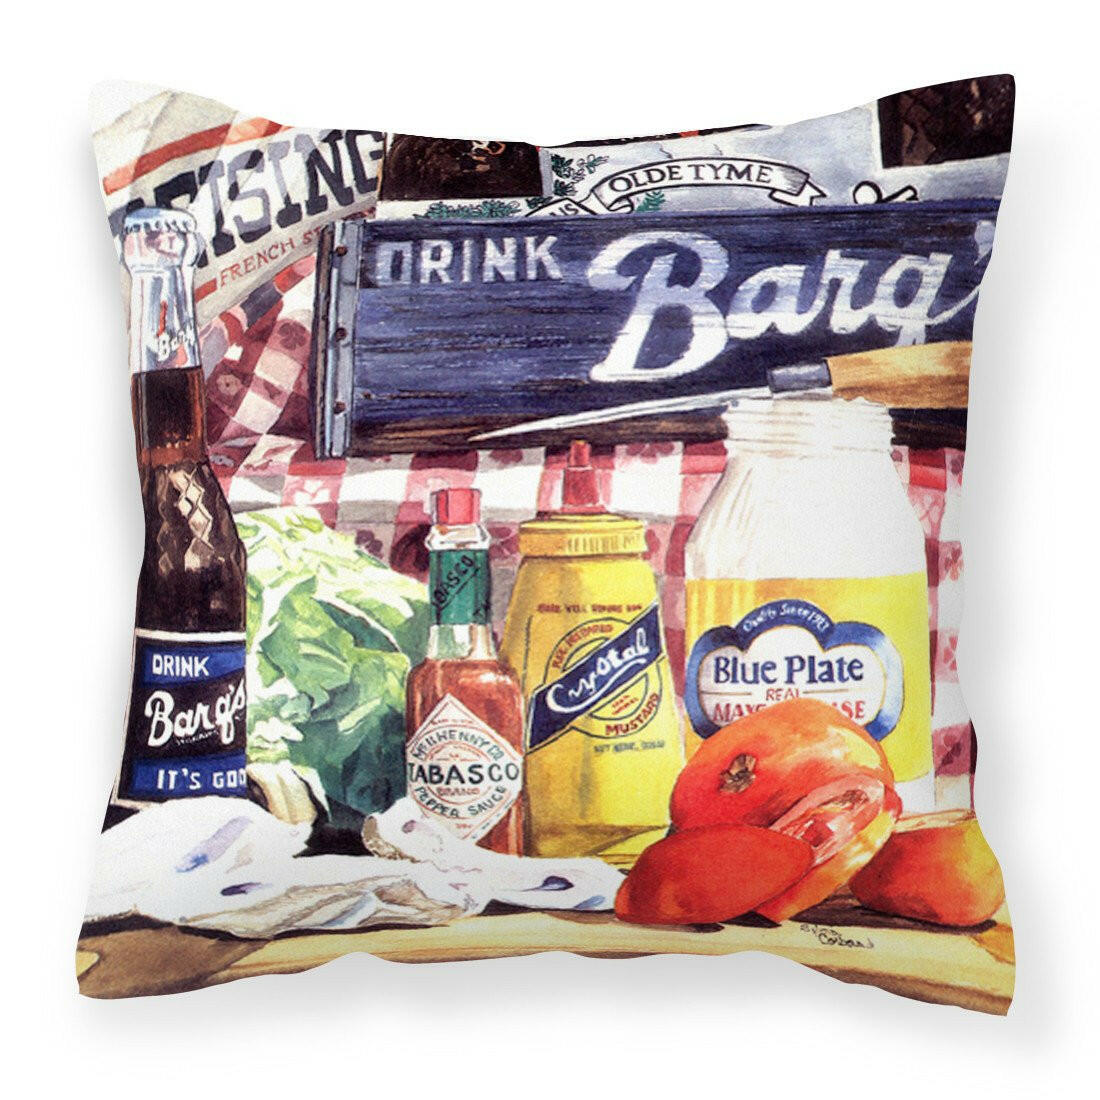 Blue Plate Mayonaise, Barq's a tomato sandwich Canvas Fabric Decorative Pillow - the-store.com